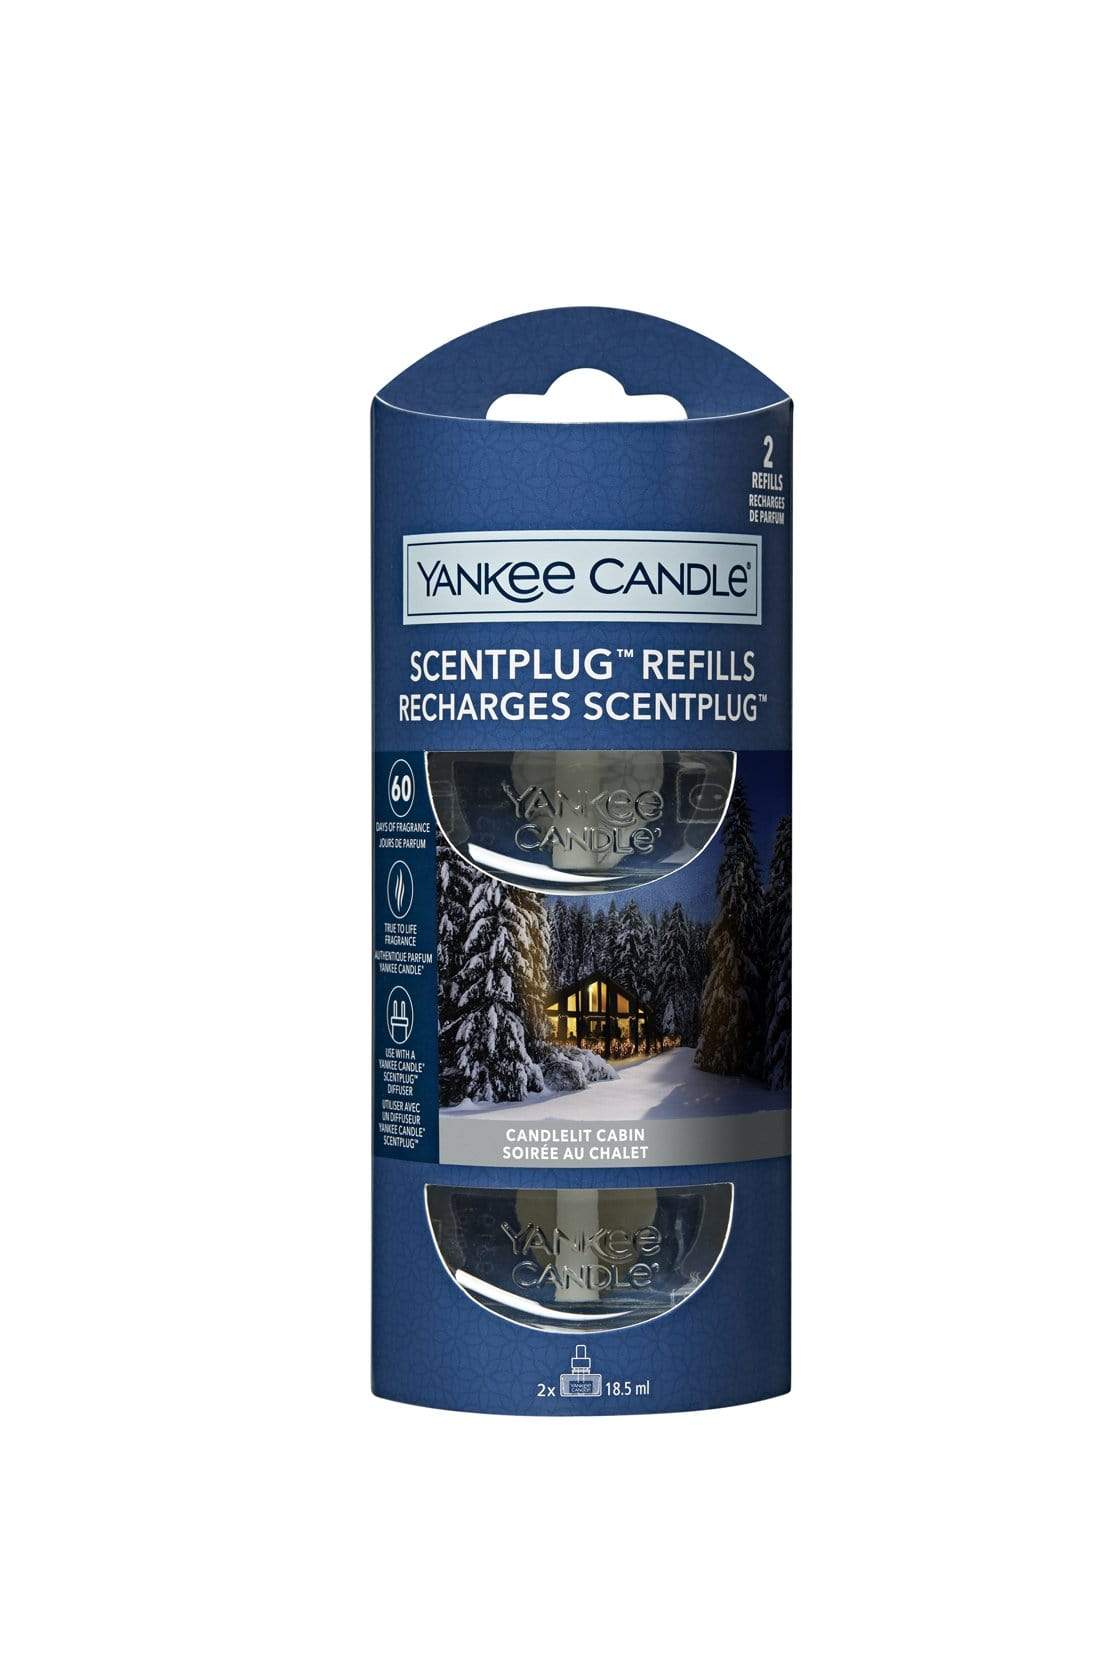 Yankee Candle Plug In Refill Yankee Candle Scentplug Refill Twin Pack - Candlelit Cabin